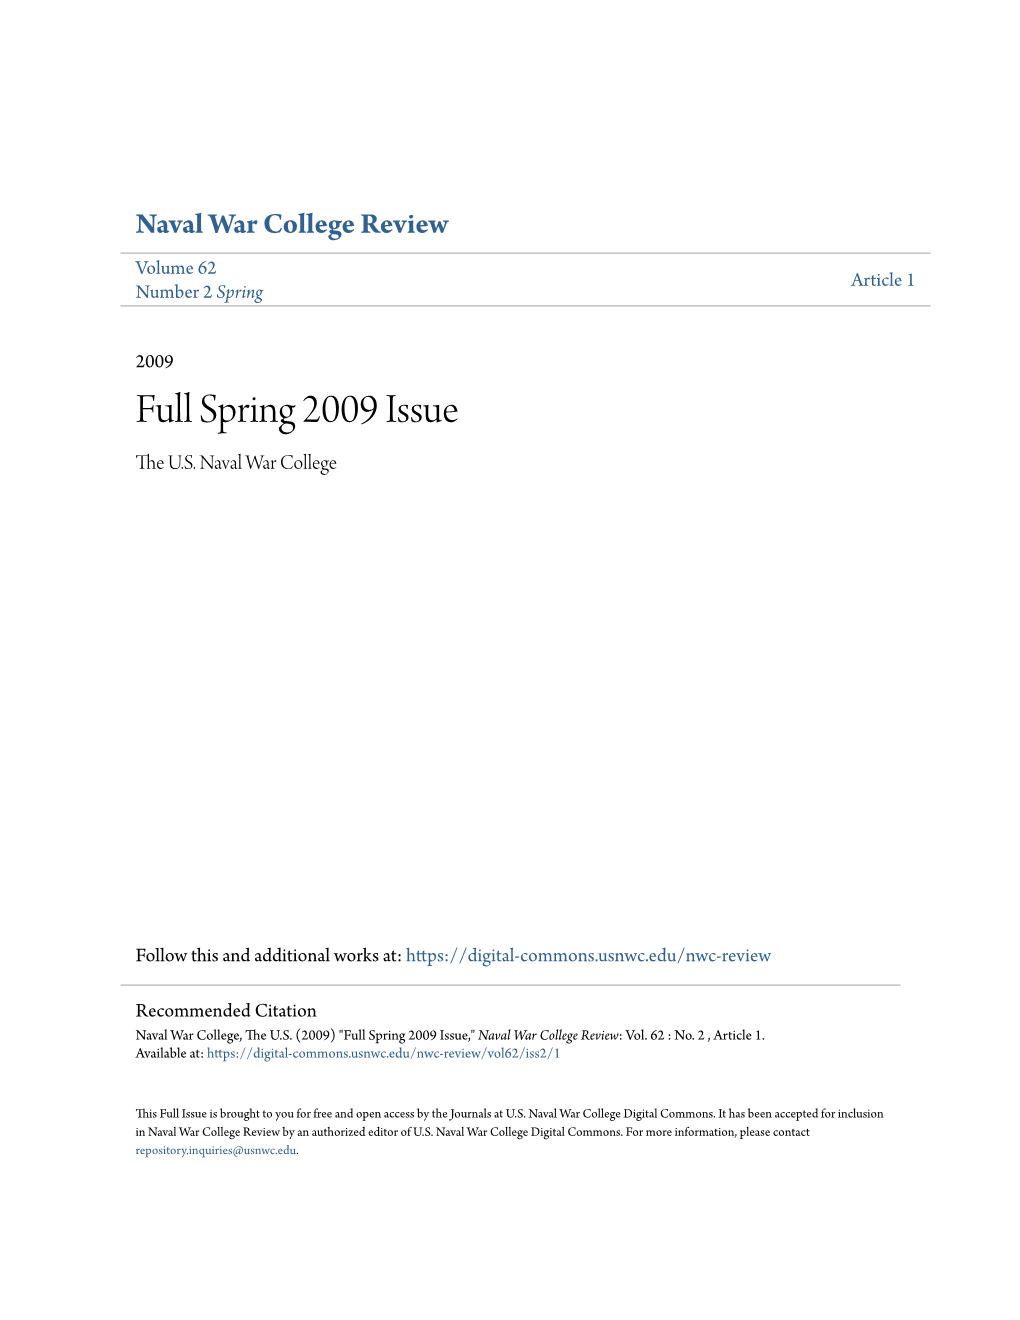 Full Spring 2009 Issue the .SU